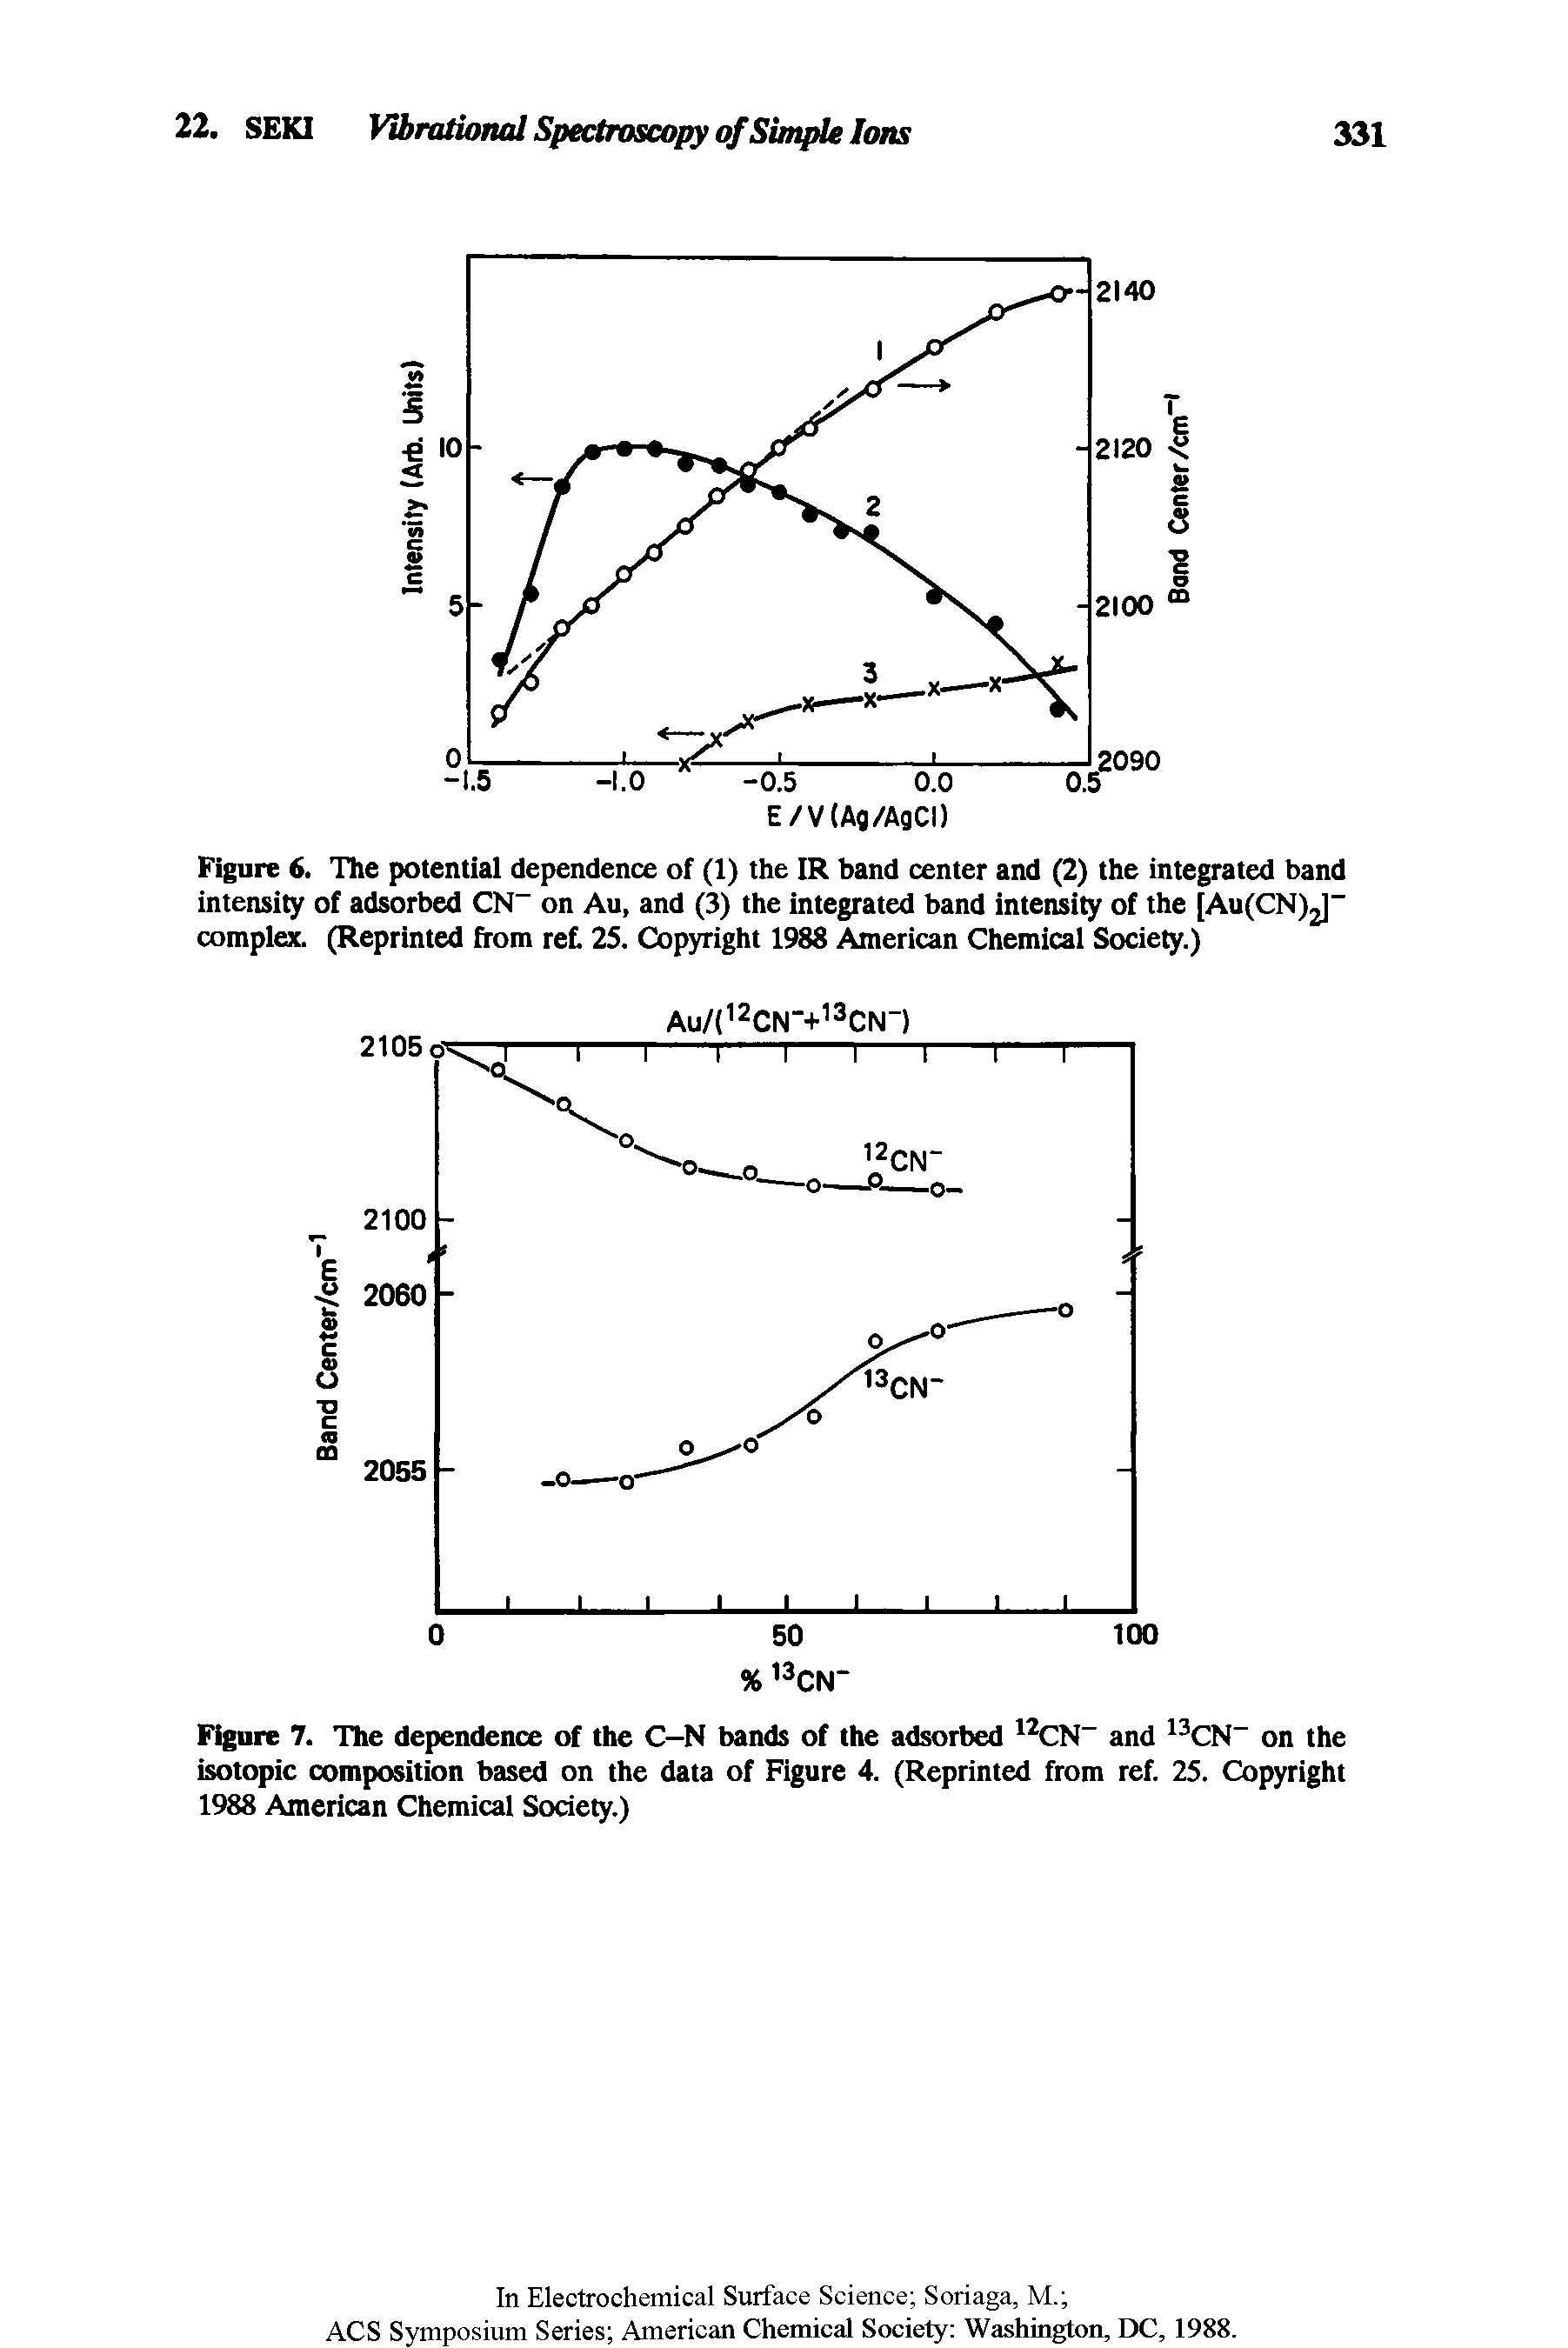 Figure 6. The potential dependence of (1) the IR band center and (2) the integrated band intensity of adsorbed CN- on Au, and (3) the integrated band intensity of the [Ai CNy complex. (Reprinted from ret 25. Copyright 1988 American Chemical Society.)...